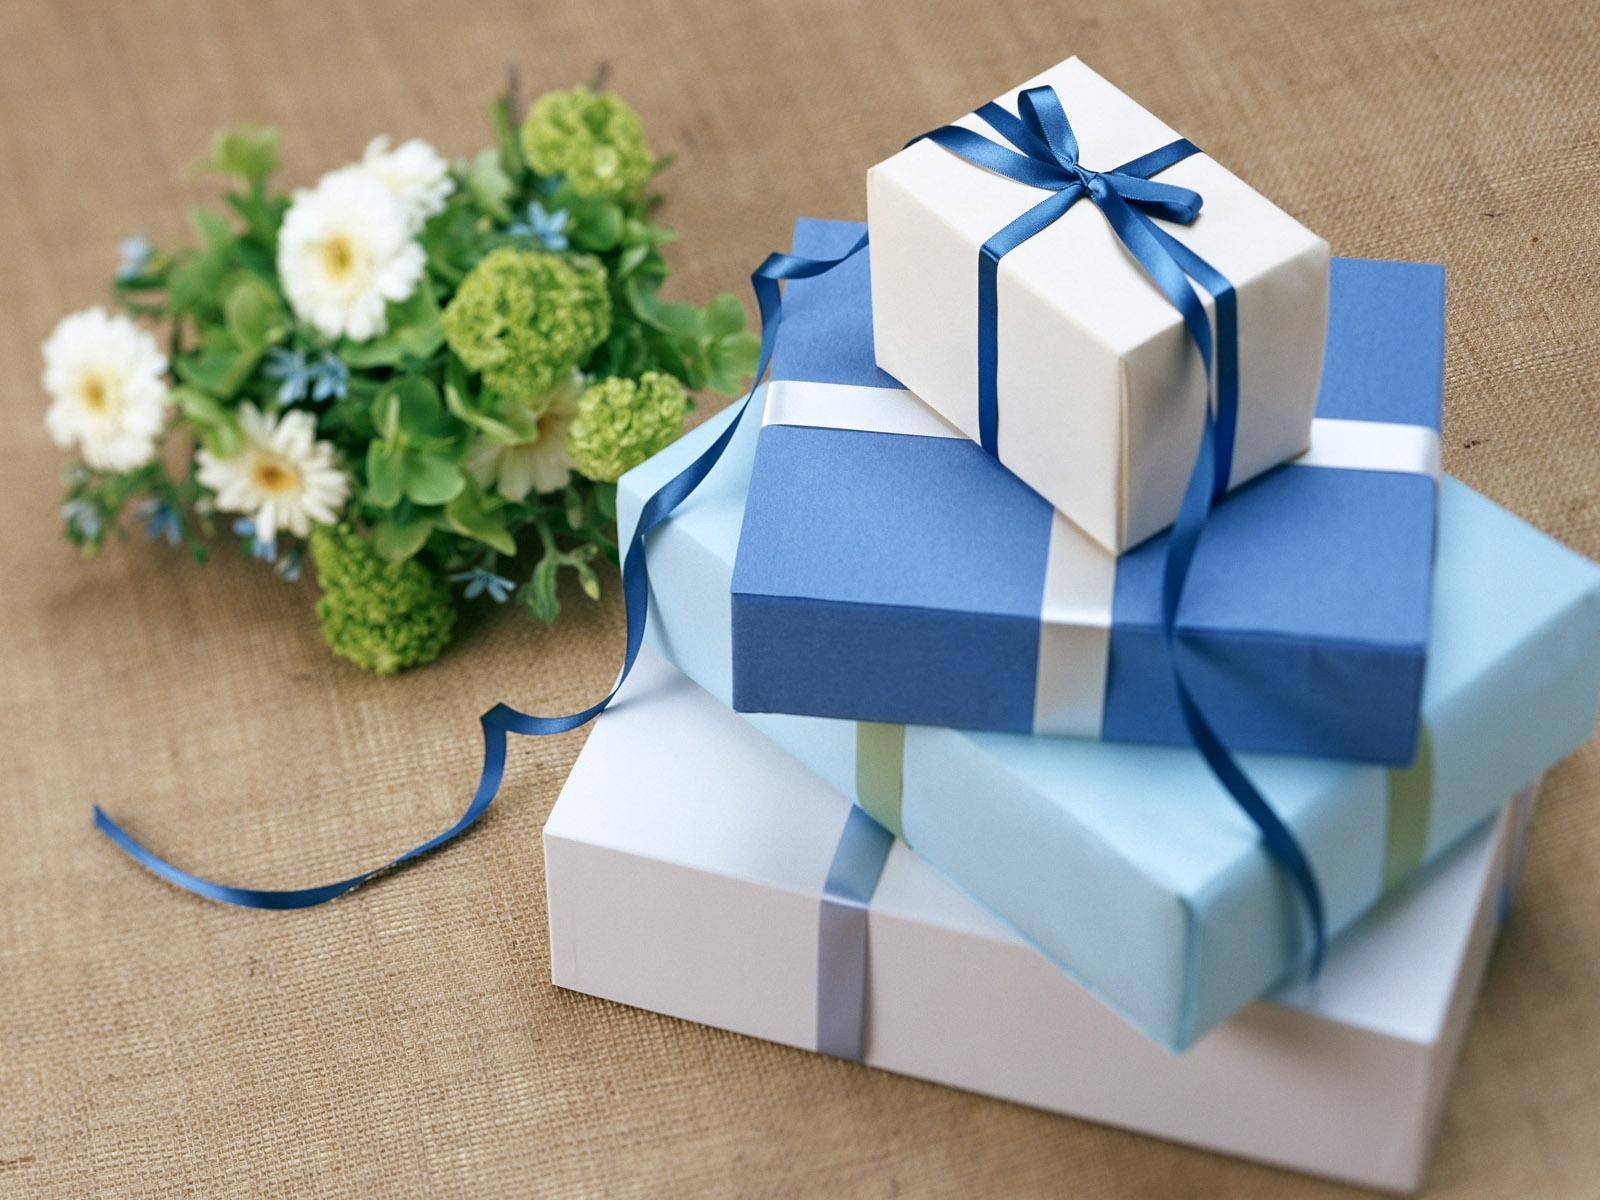 Gifts & Presents Wallpaper